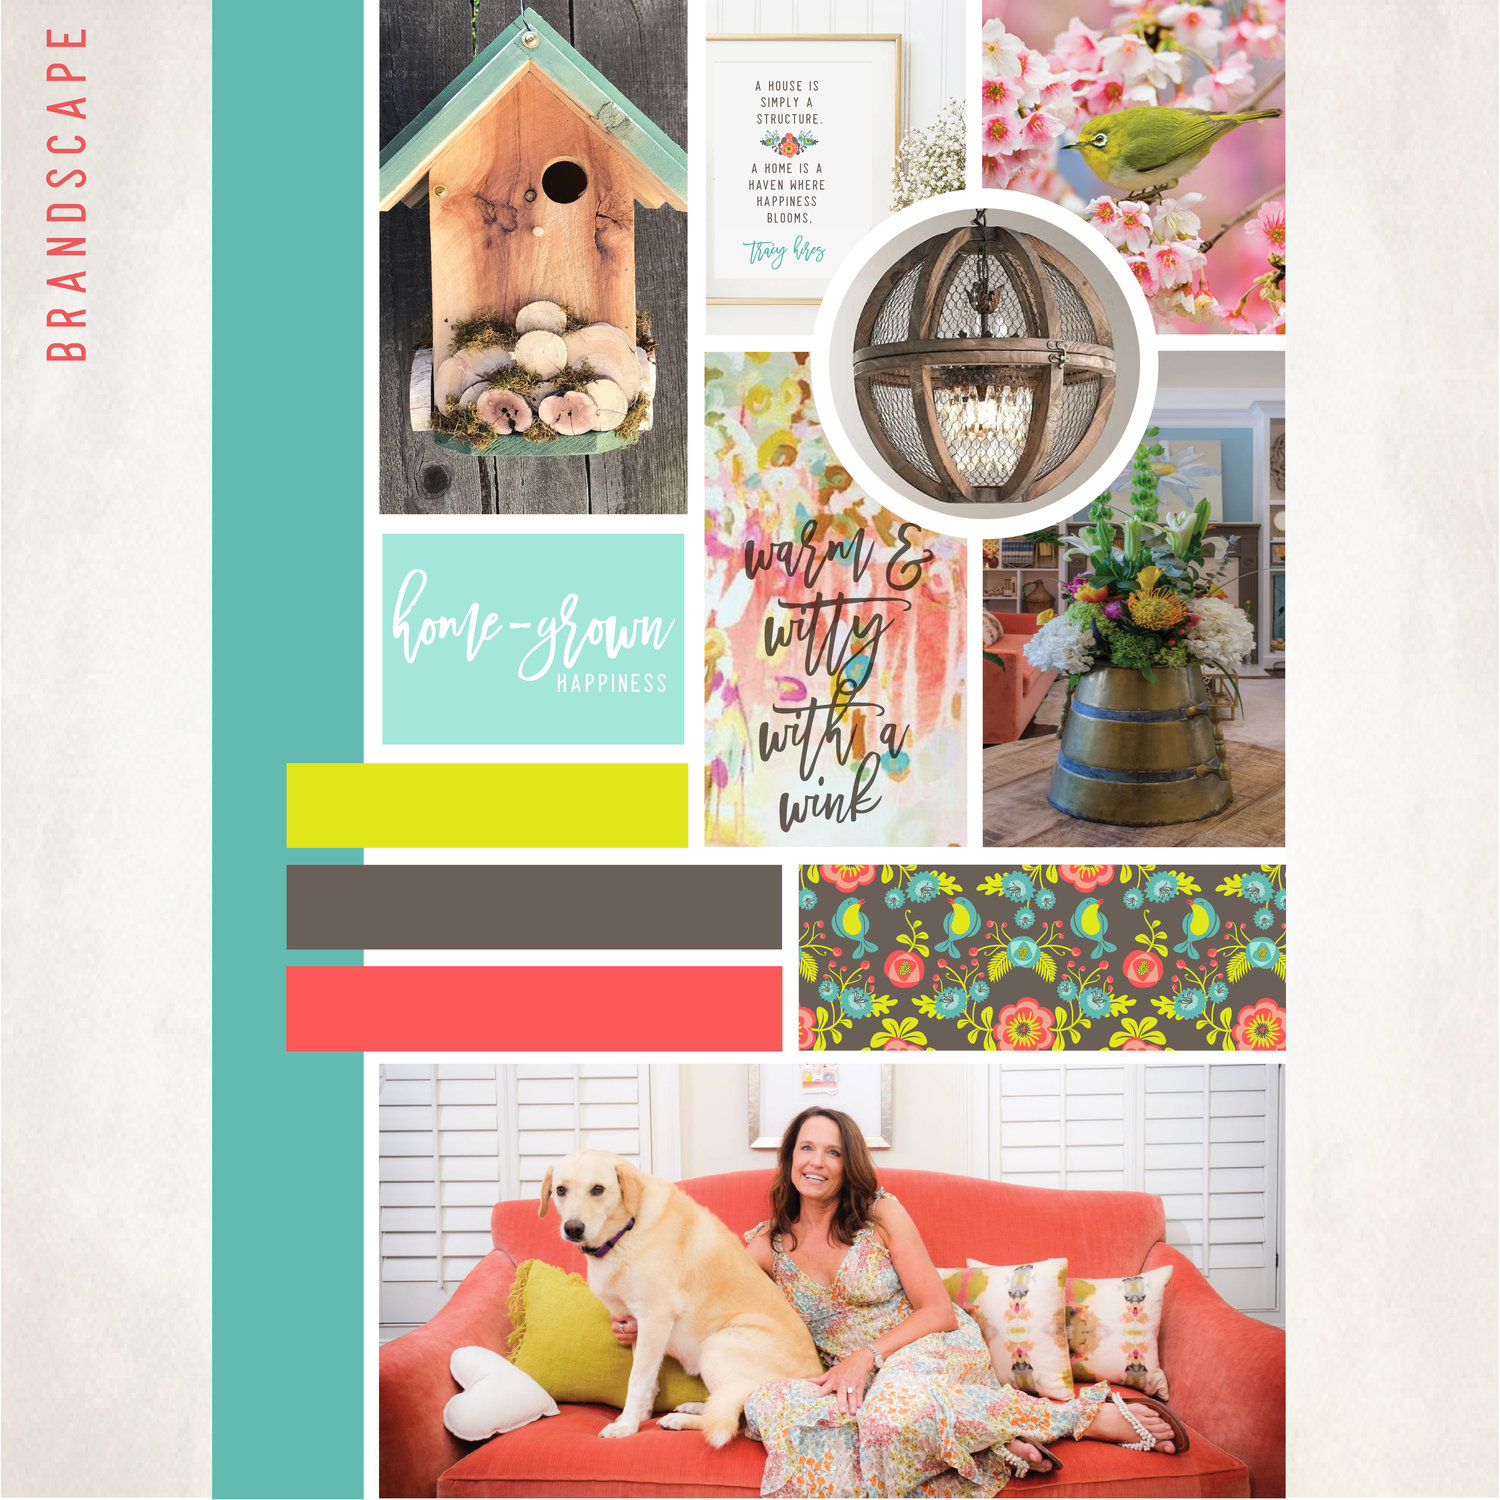 Meet Down To Earth Decorator Happy Haven Design Founder